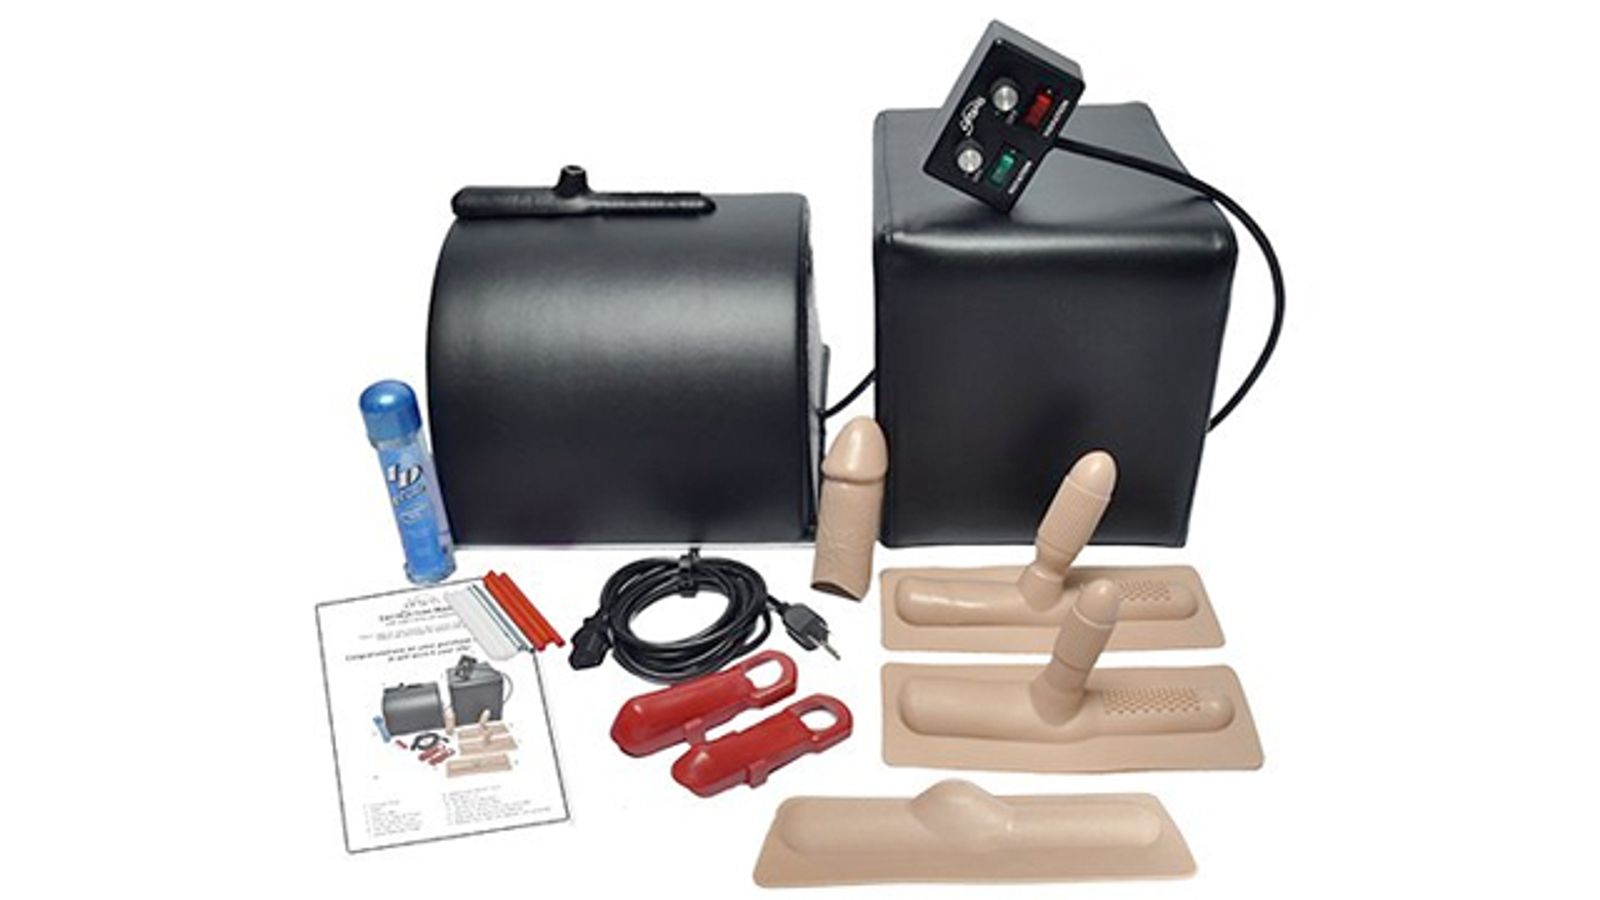 Sybian Now Available on Amazon.com